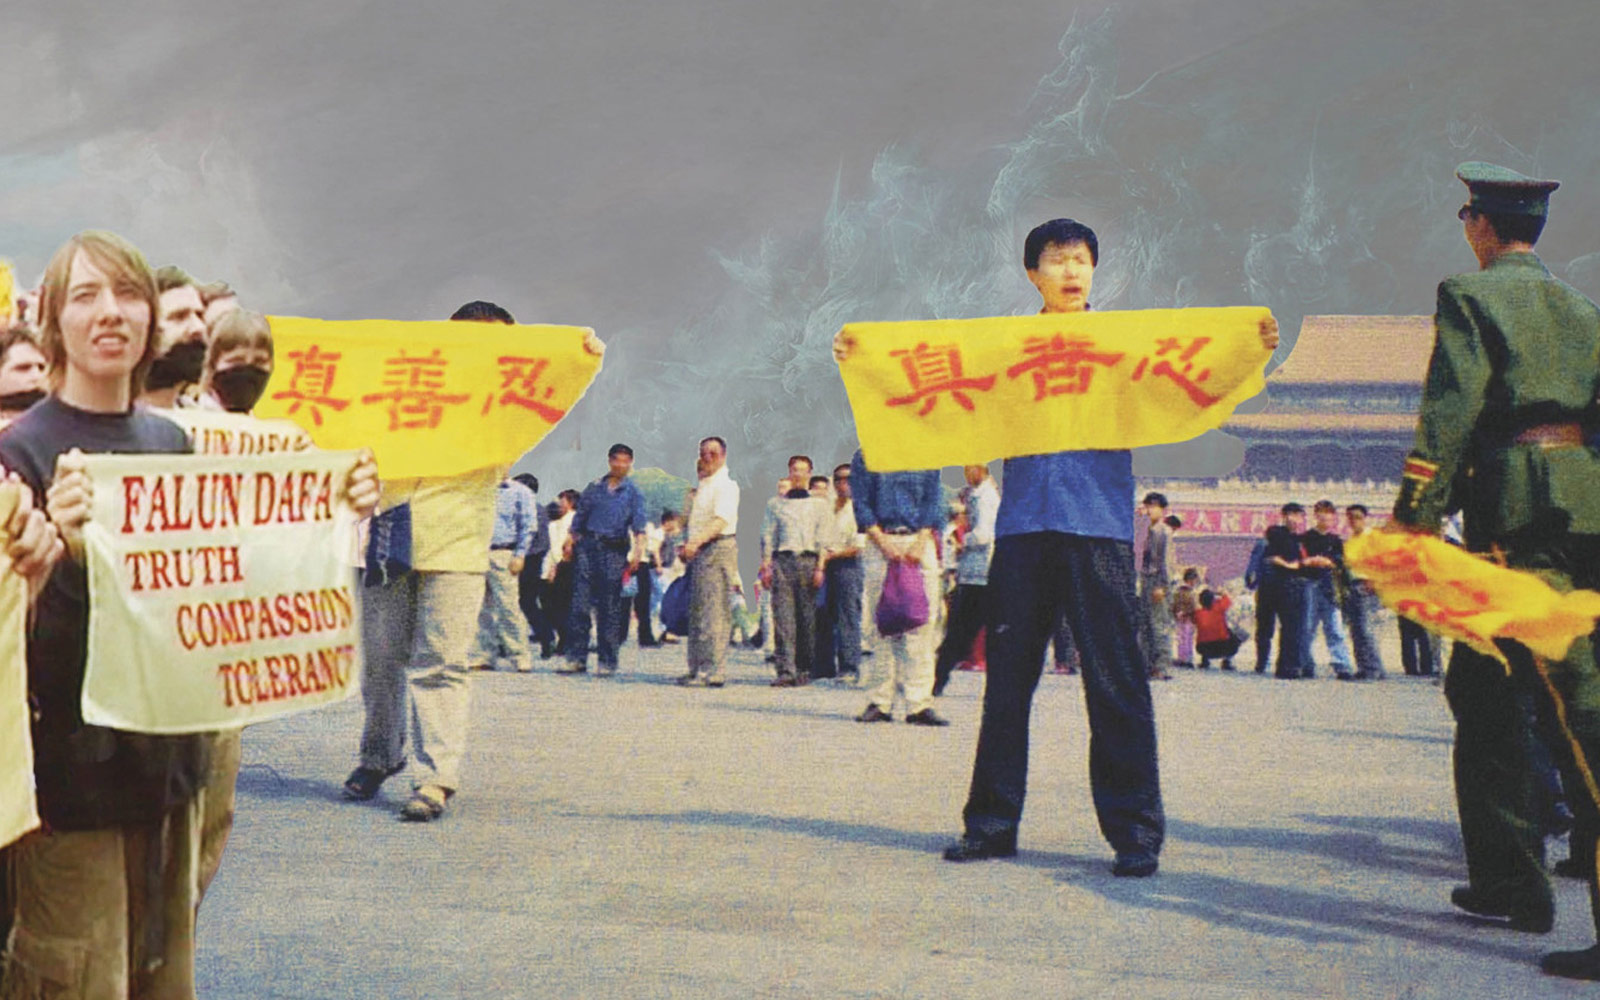   THE PERSECUTION OF FALUN GONG    Watch Now  